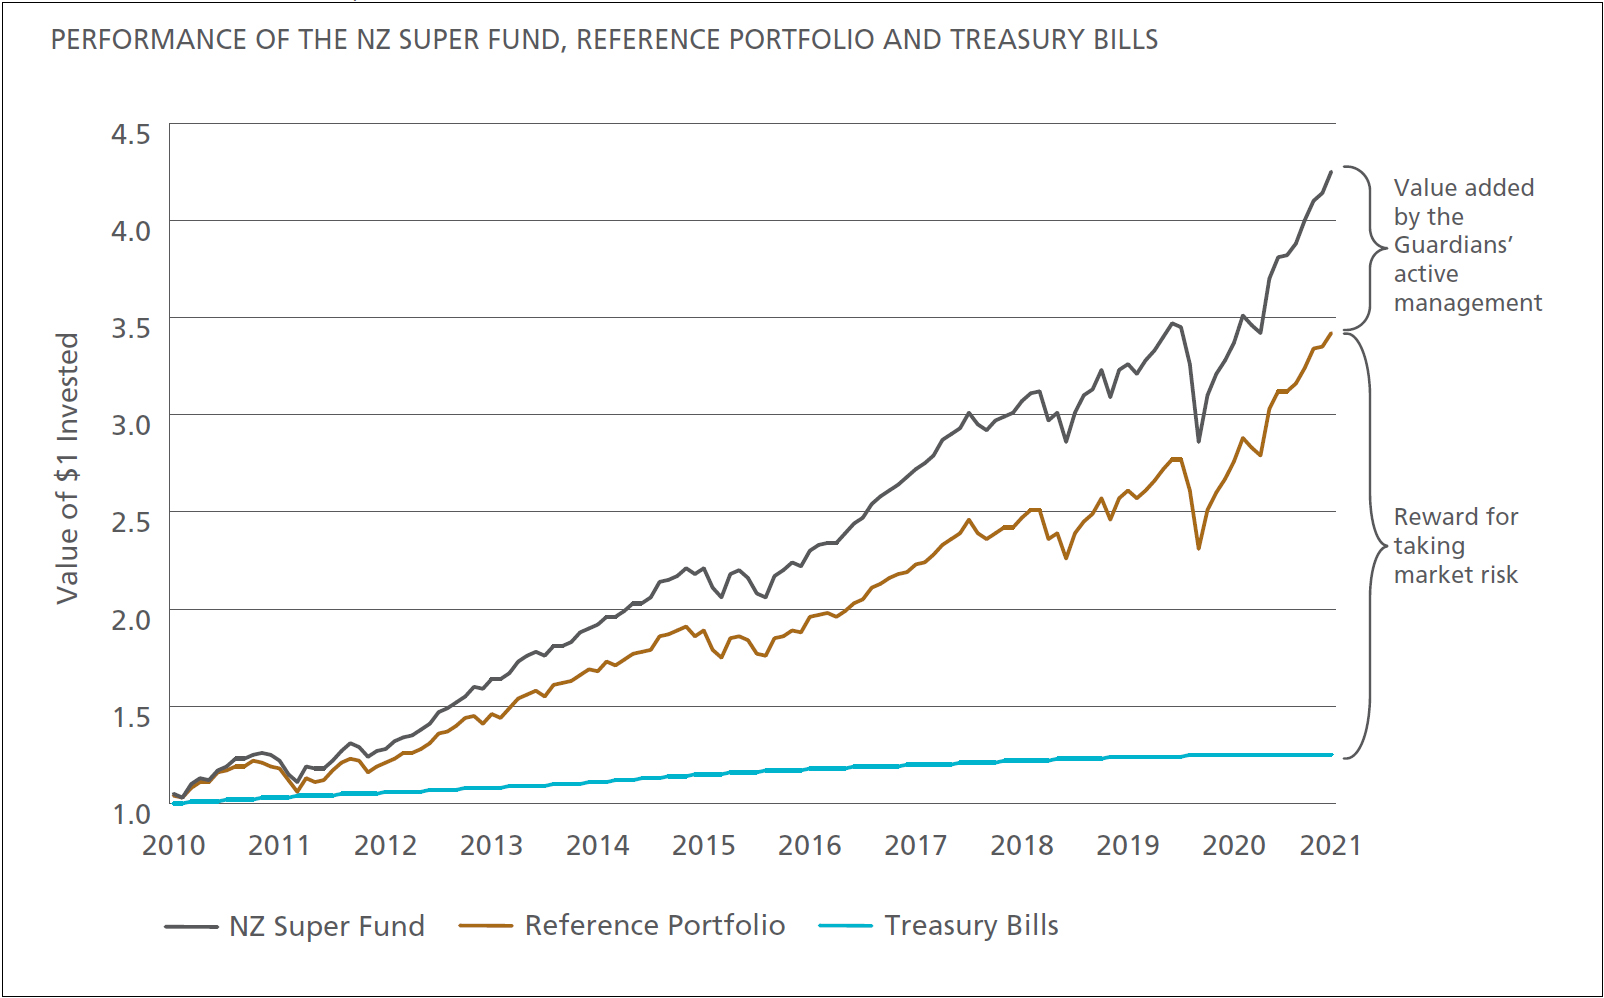 Example 21 Line graph from the Guardians of New Zealand Superannuation’s 2020/21 Annual Report that shows the performance of the New Zealand Super Fund, the Reference Portfolio, and the Treasury Bills.